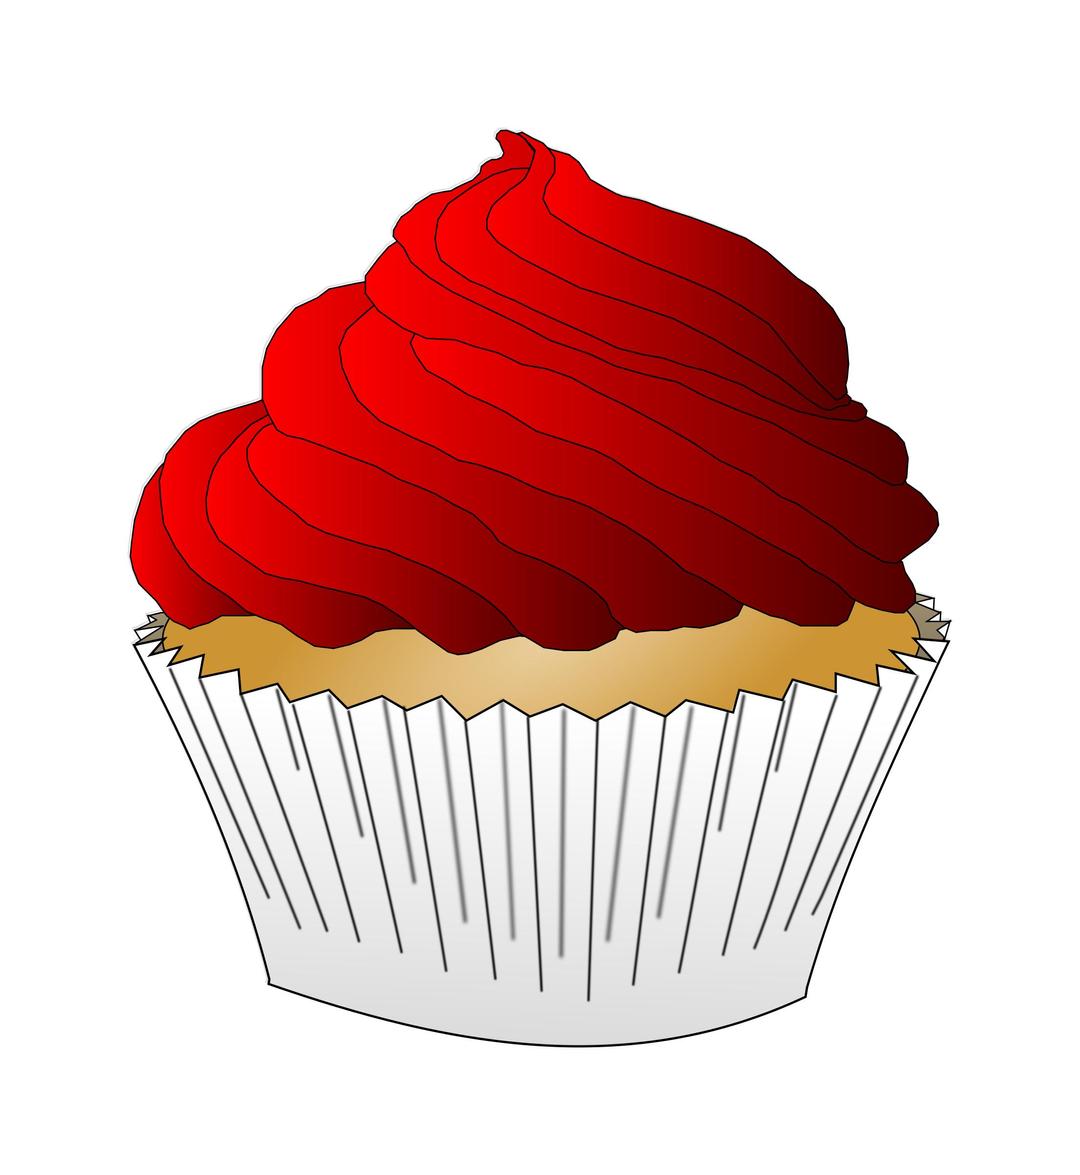 Red Frosting Cupcake png transparent